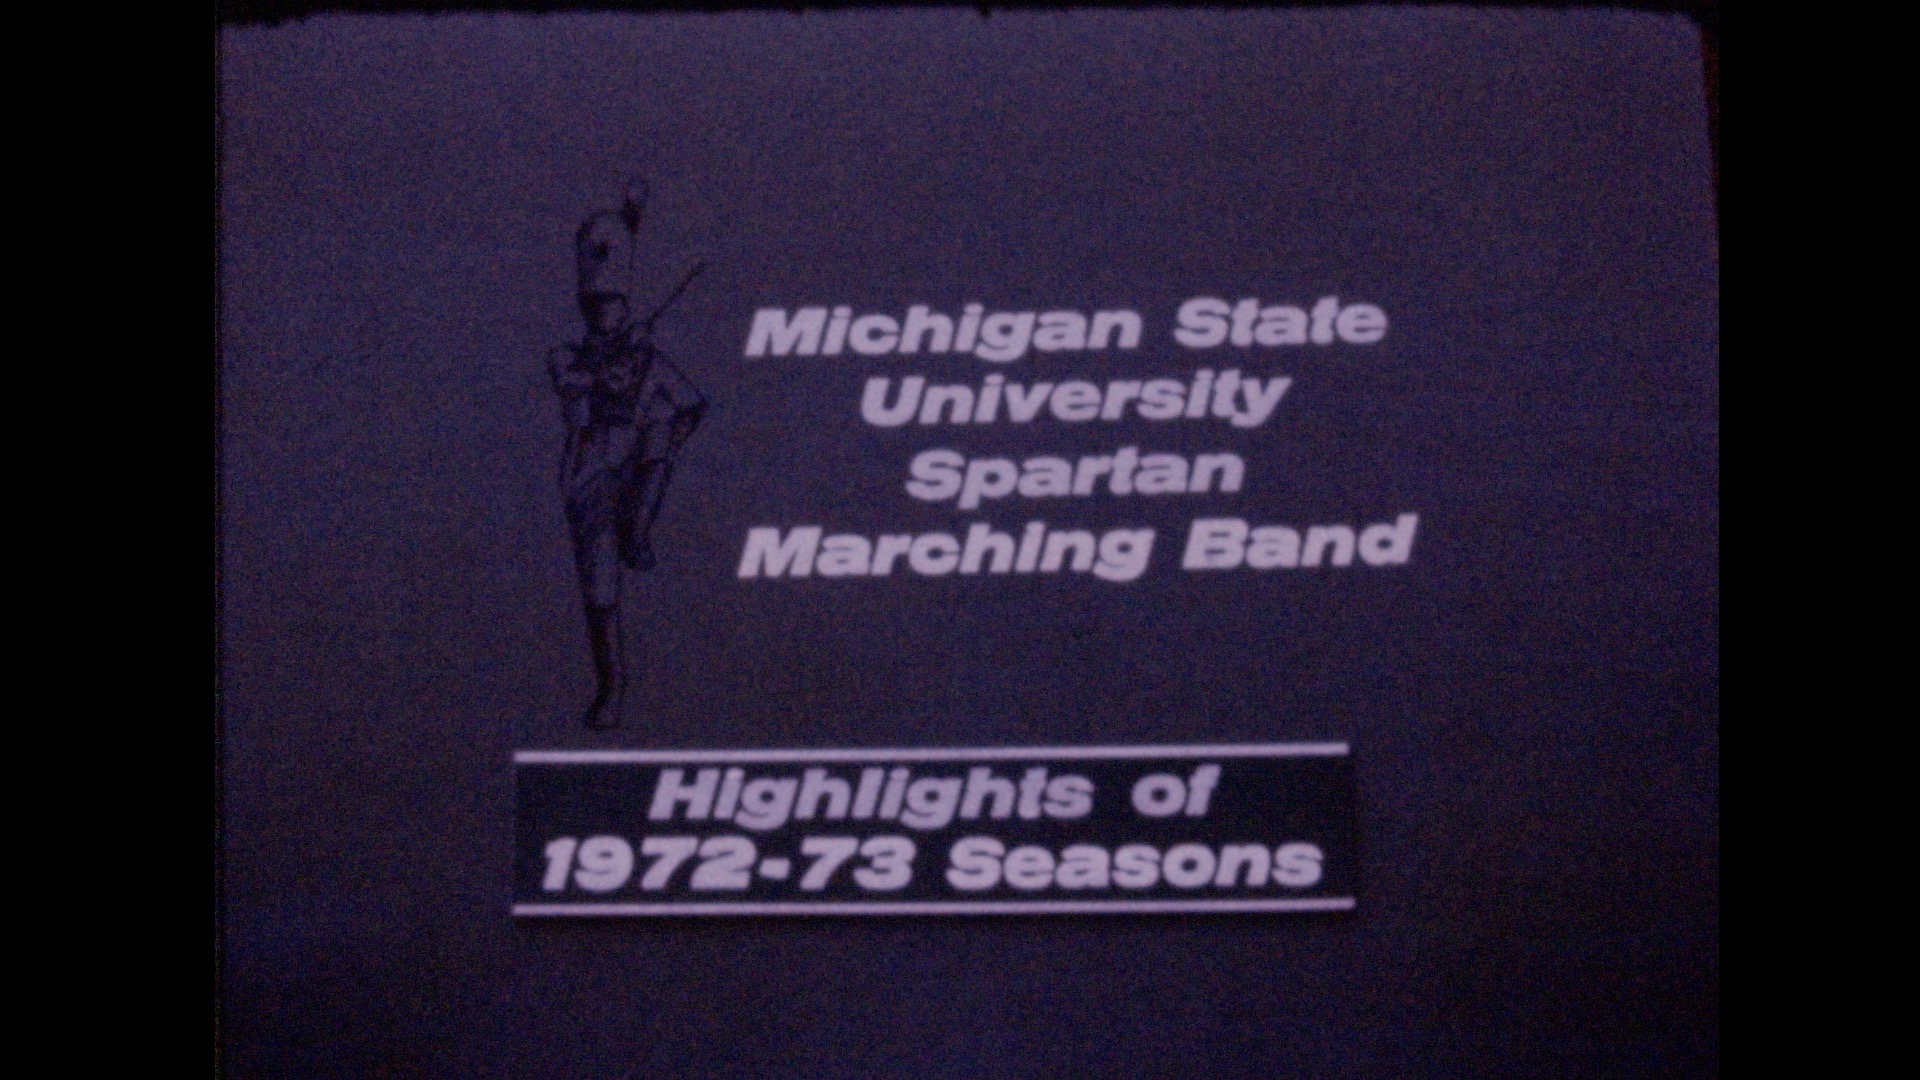 Spartan Marching Band: Highlights of the 1972-1973 Seasons